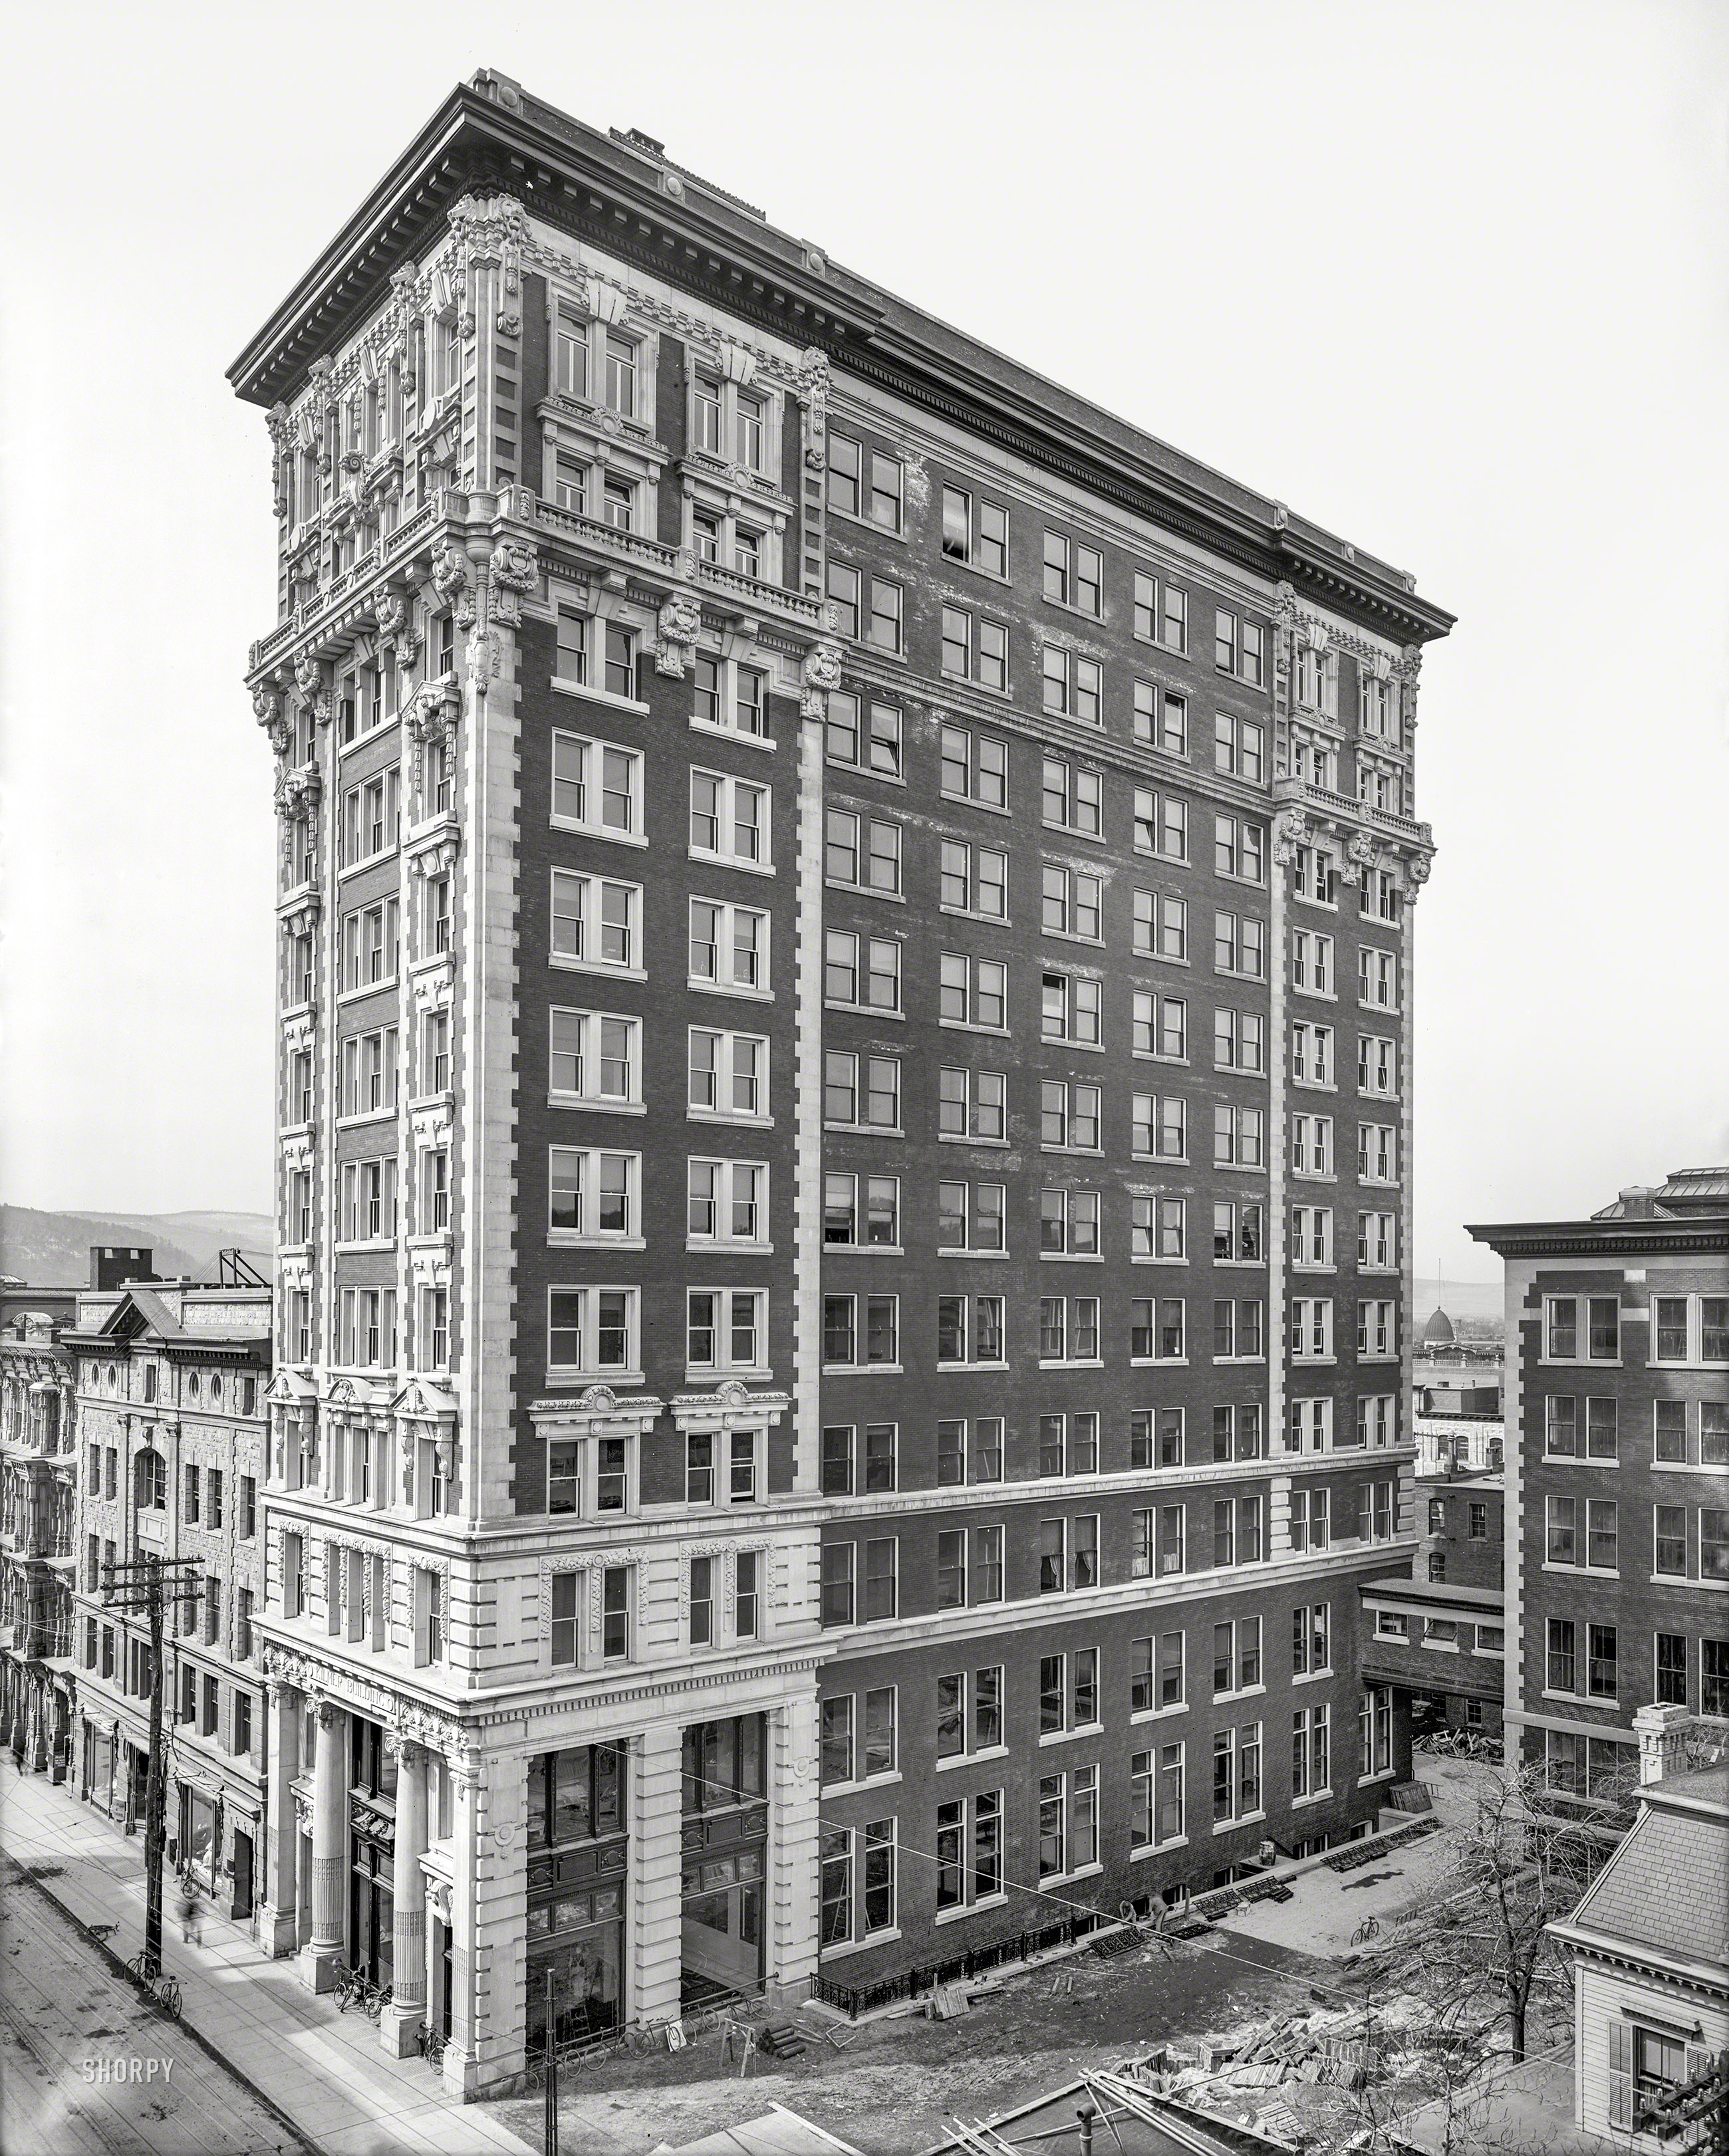 Binghamton, New York, circa 1905. "Kilmer Building, Chenango Street." Also known as the Press Building, this was headquarters of patent-medicine magnate Willis Kilmer's newspaper. 8x10 inch glass negative. View full size.
